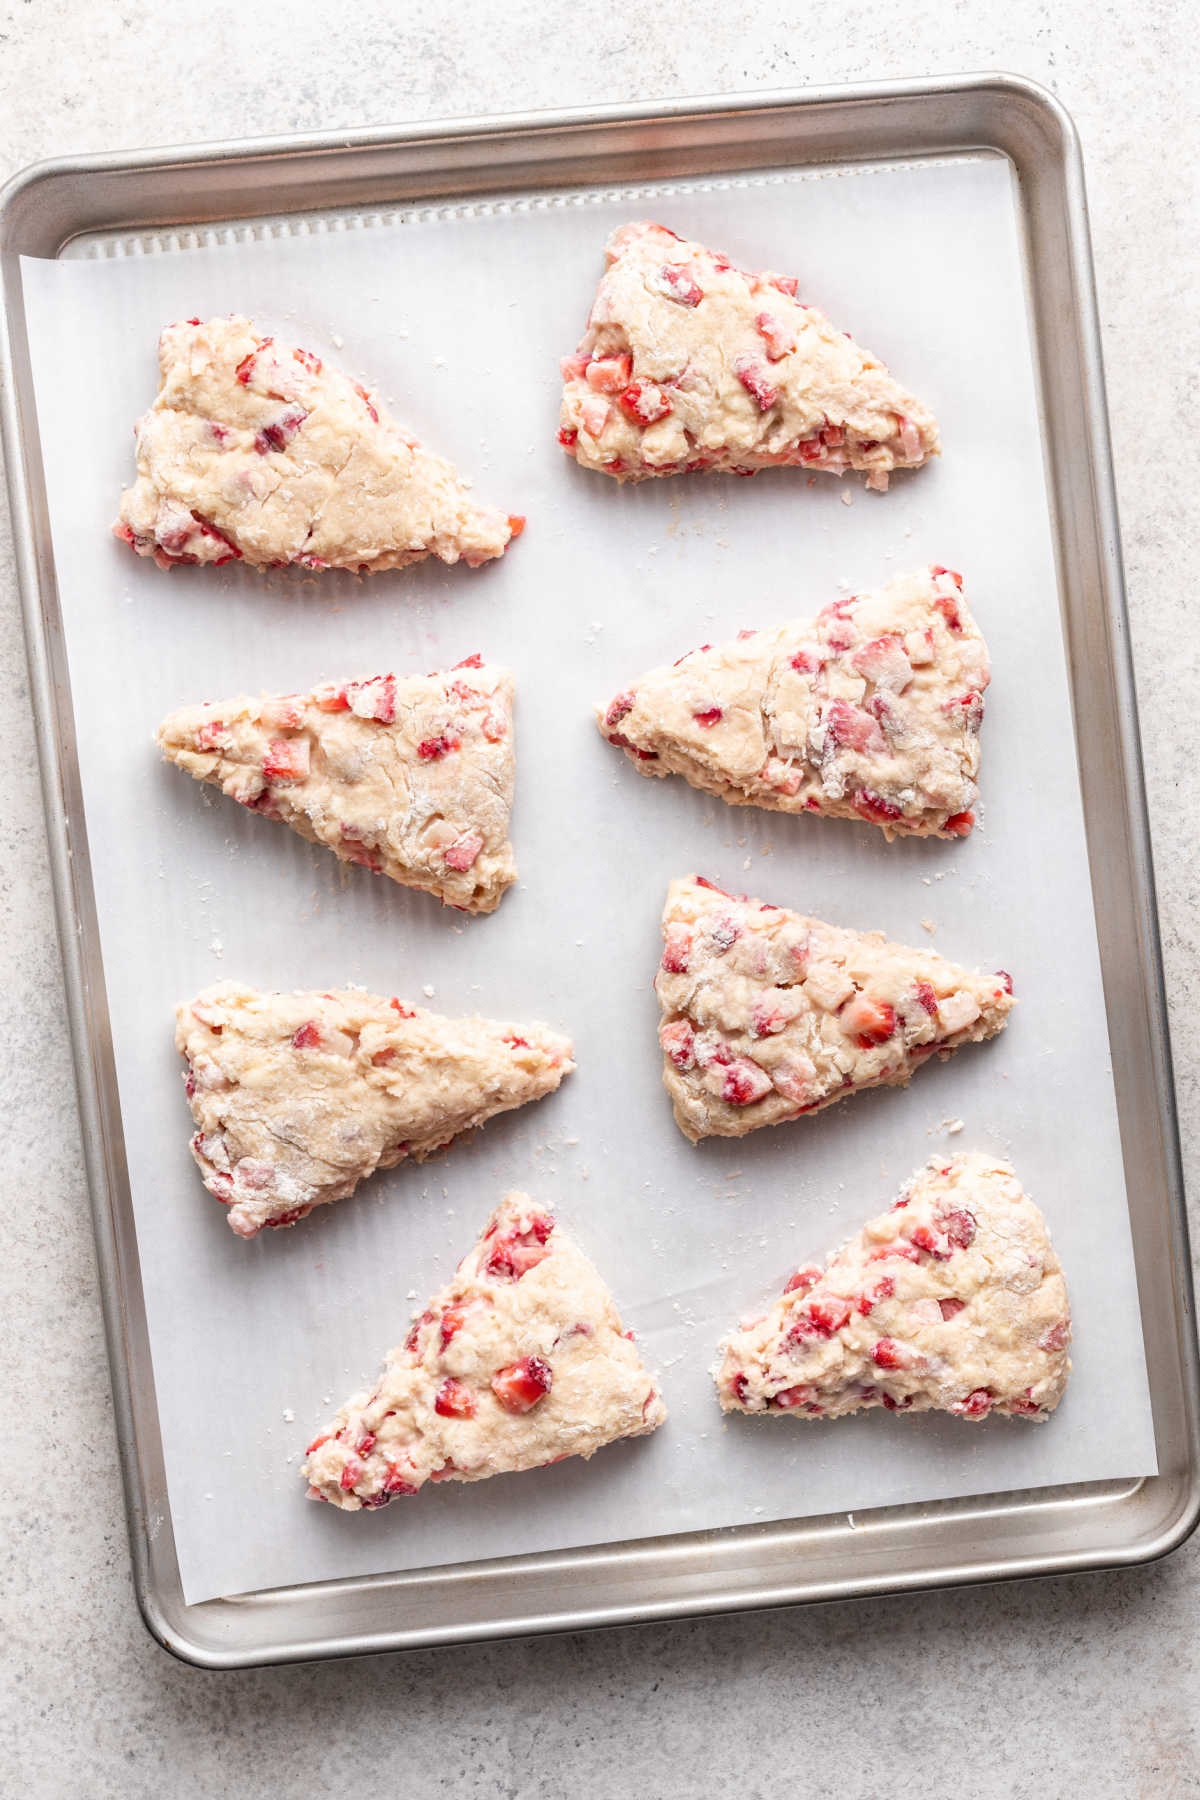 Unbaked strawberry scones on a baking tray.